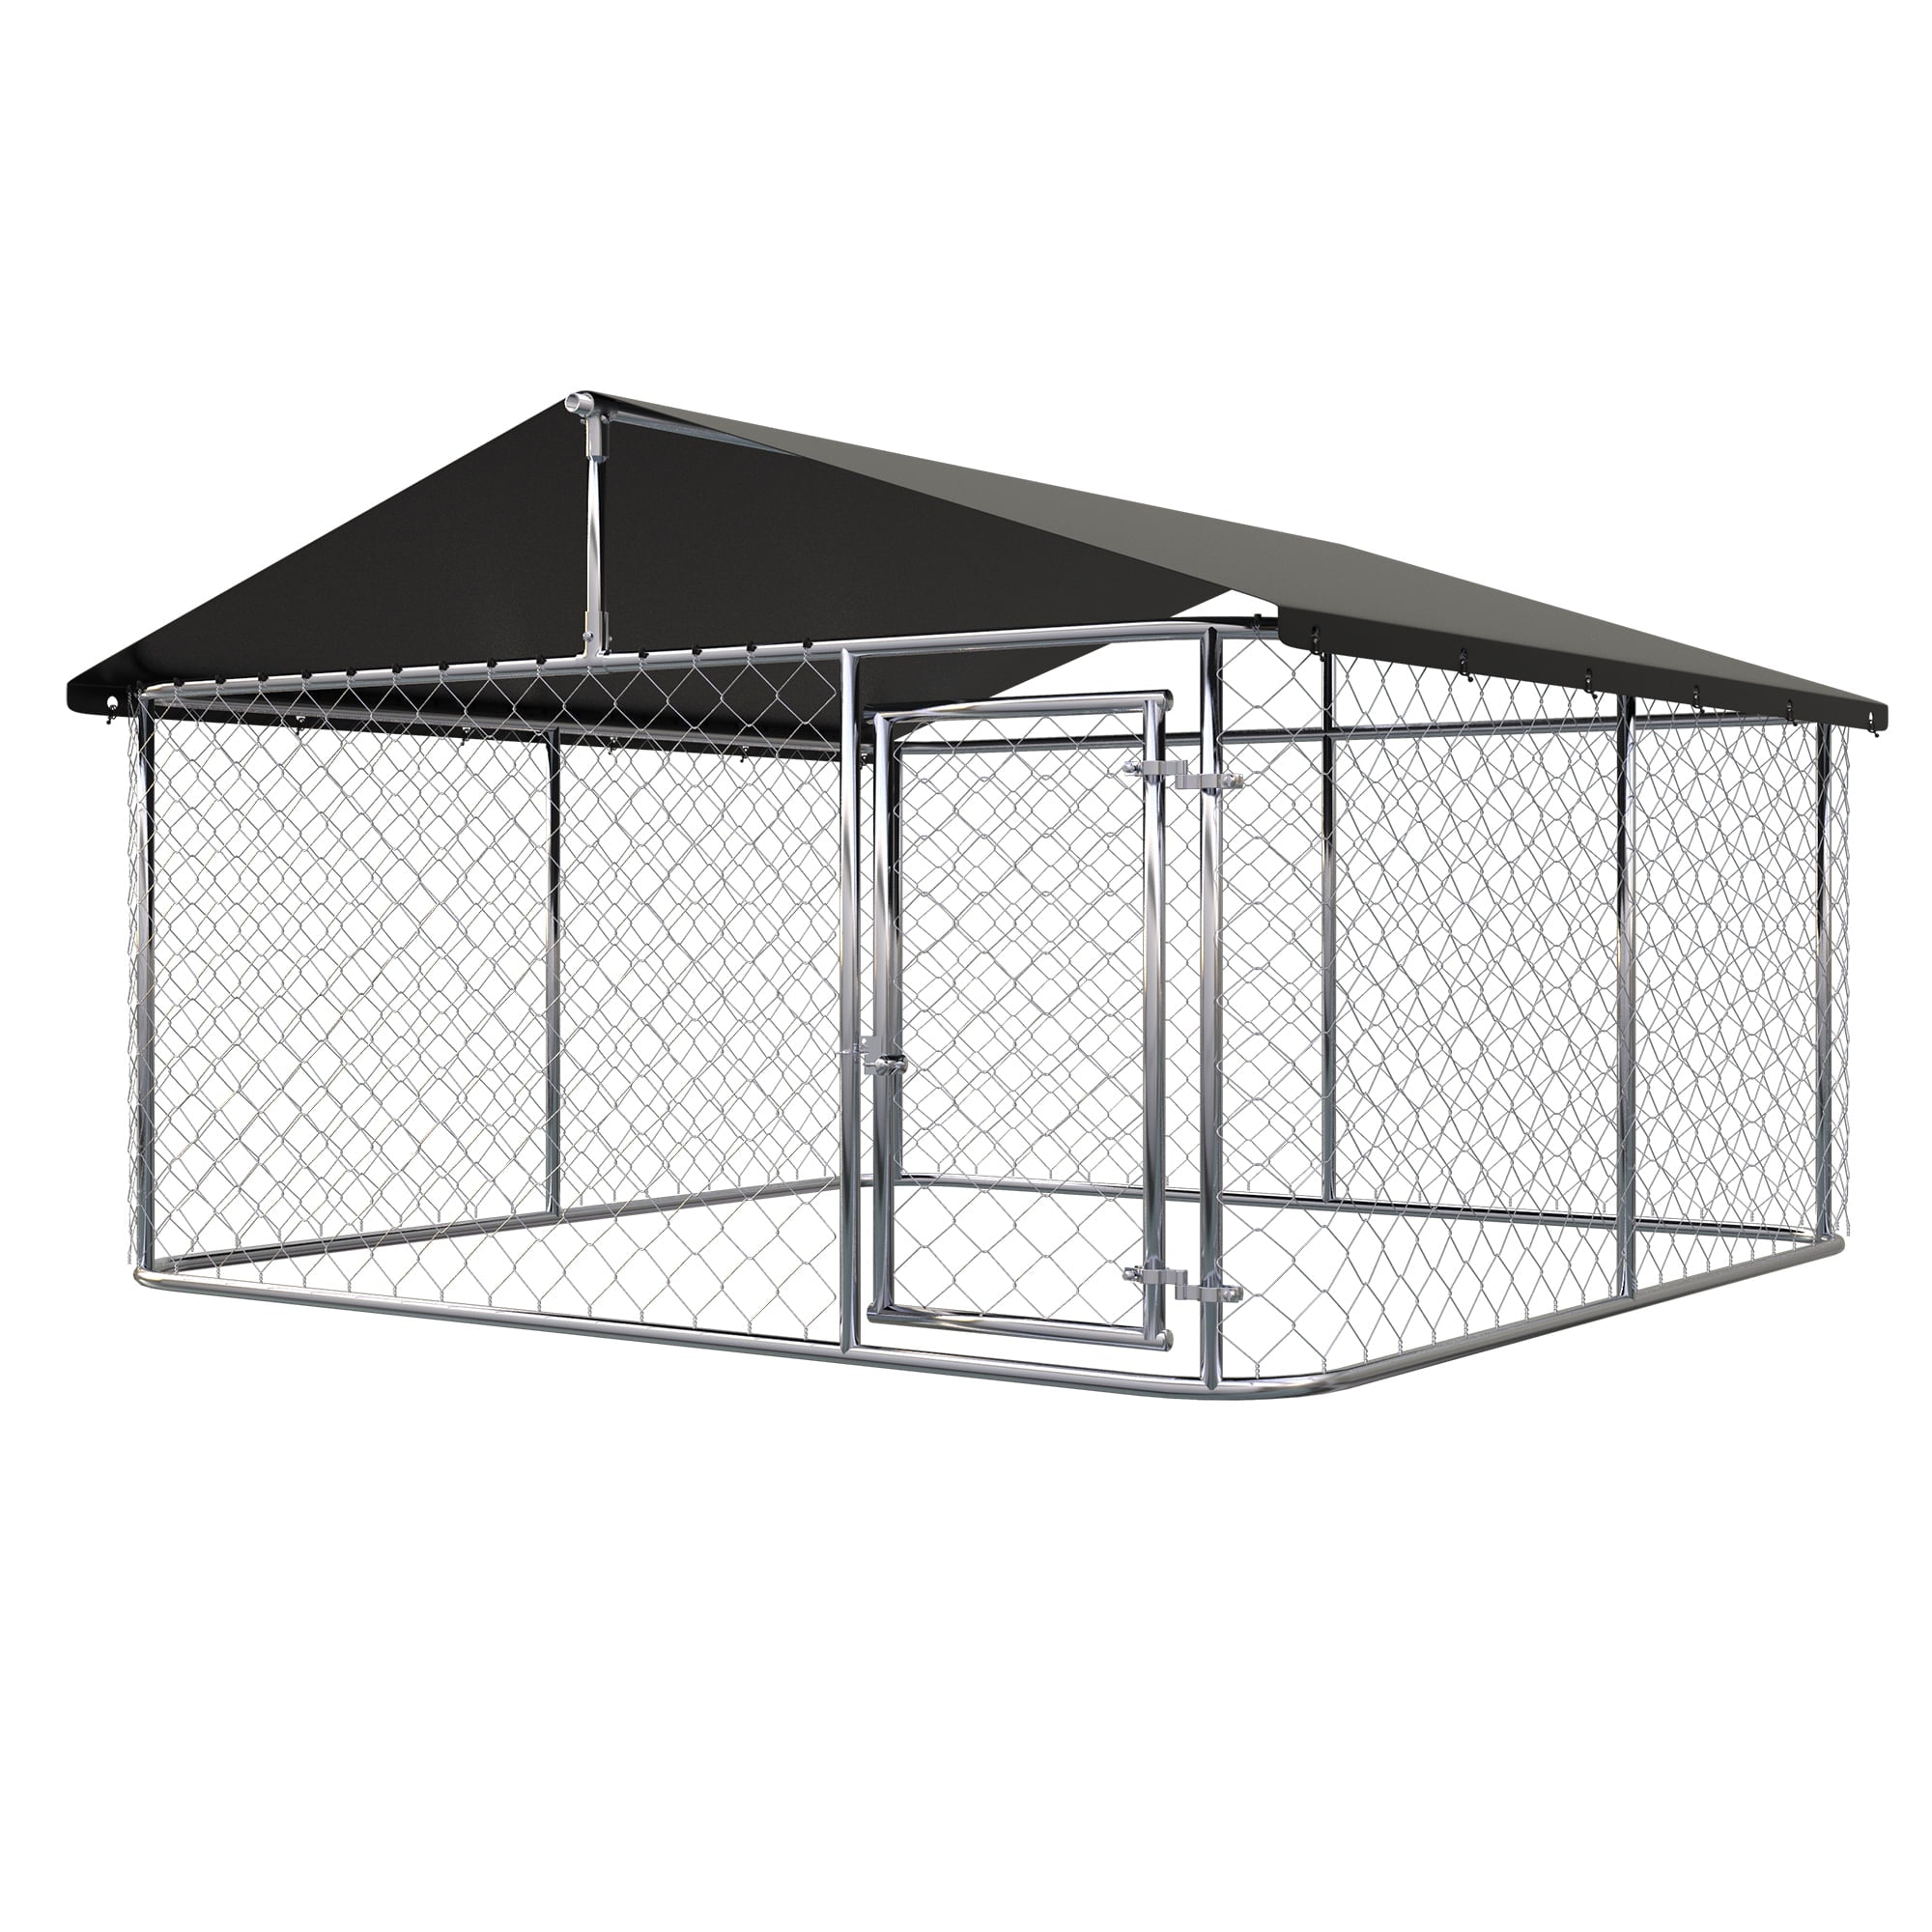 Petony Outdoor Dog Kennel Dog Cage Dog Playpen Dog Fence Chicken Coop Hen House Heavy Duty Pet Playpen with Large Galvanized Chain Link with UV and Water Resistant Black Proof Cover